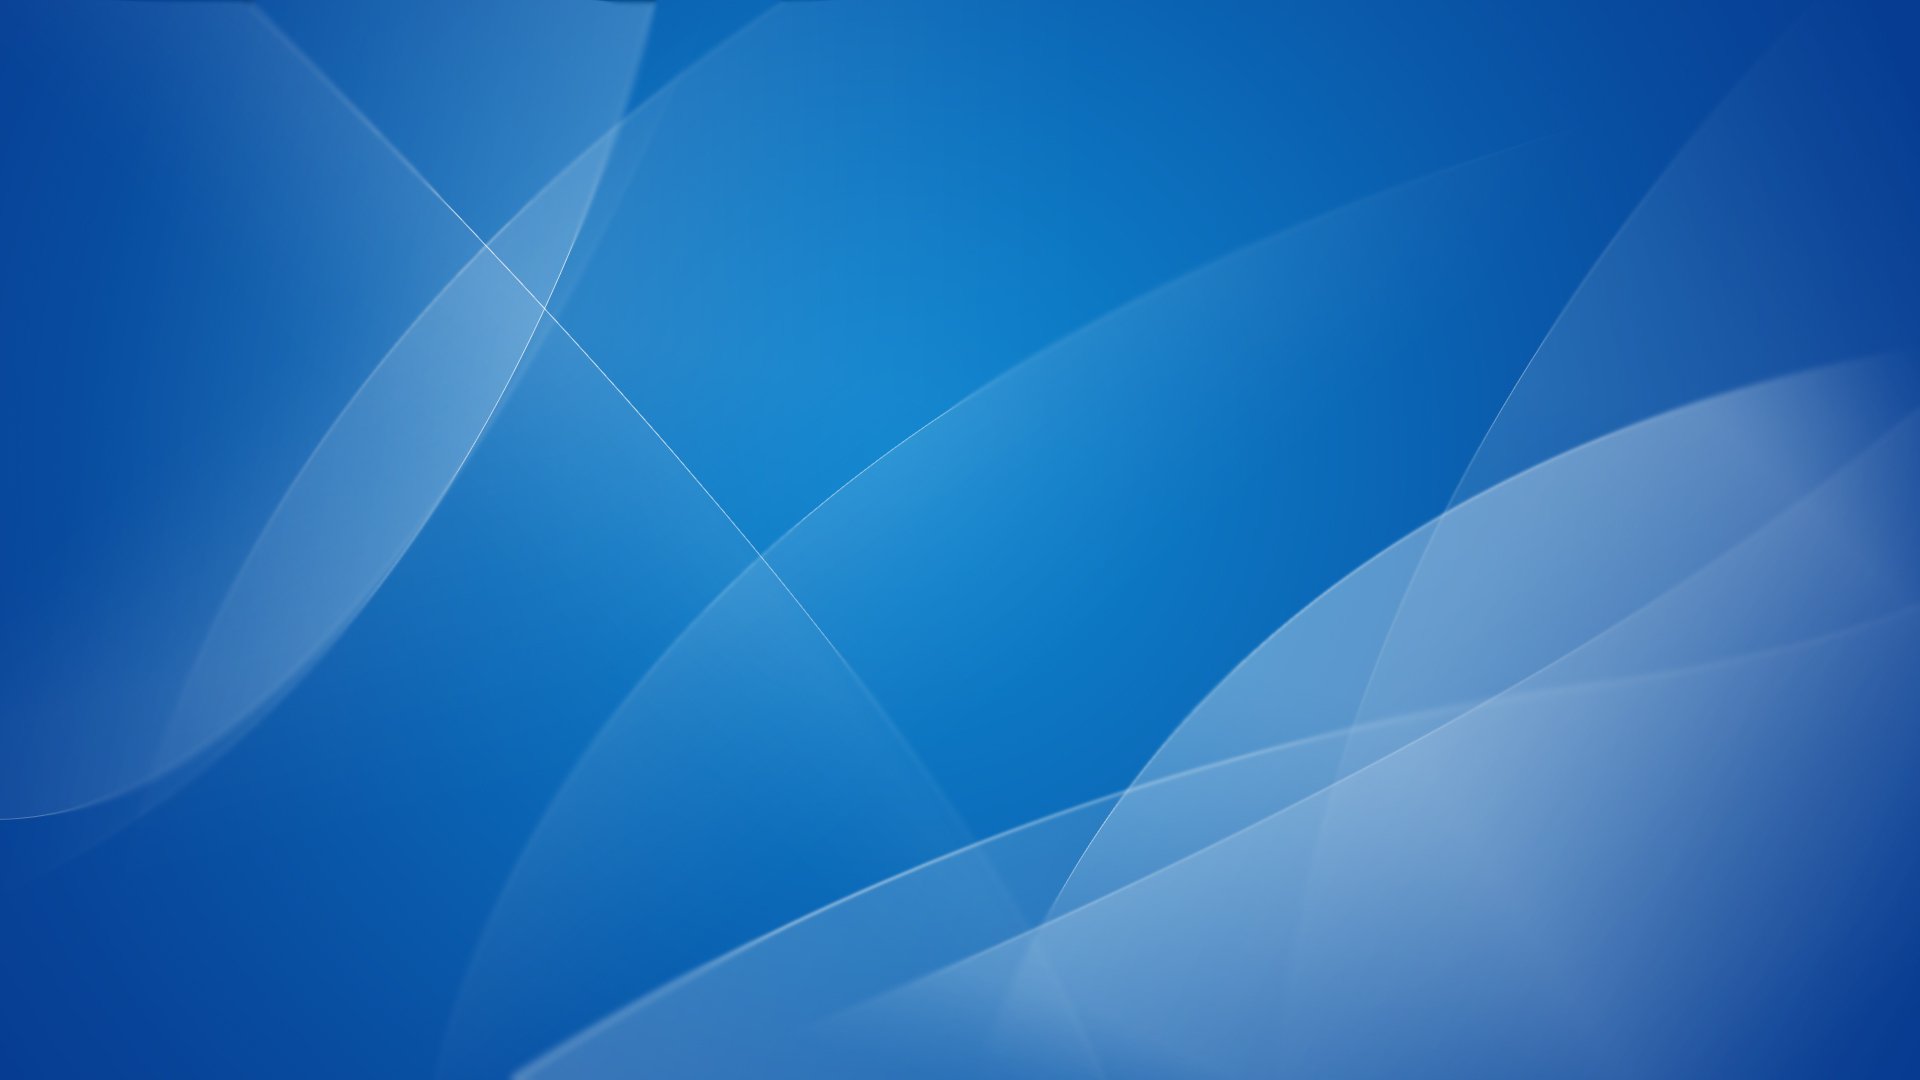 30 HD Blue WallpapersBackgrounds For Download 1920x1080